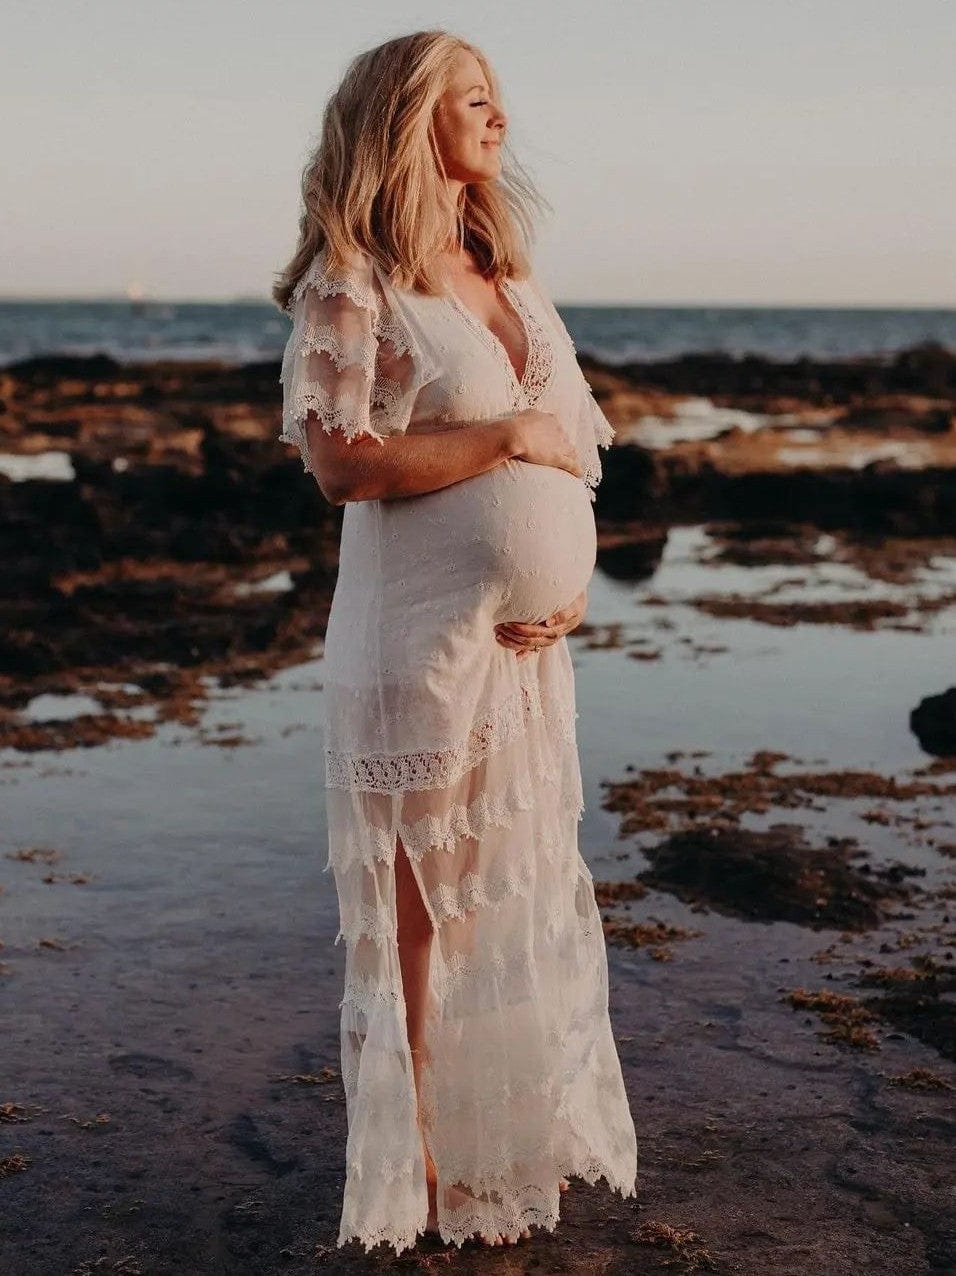 Pregnant mum in water wearing a boho white lace maternity dress